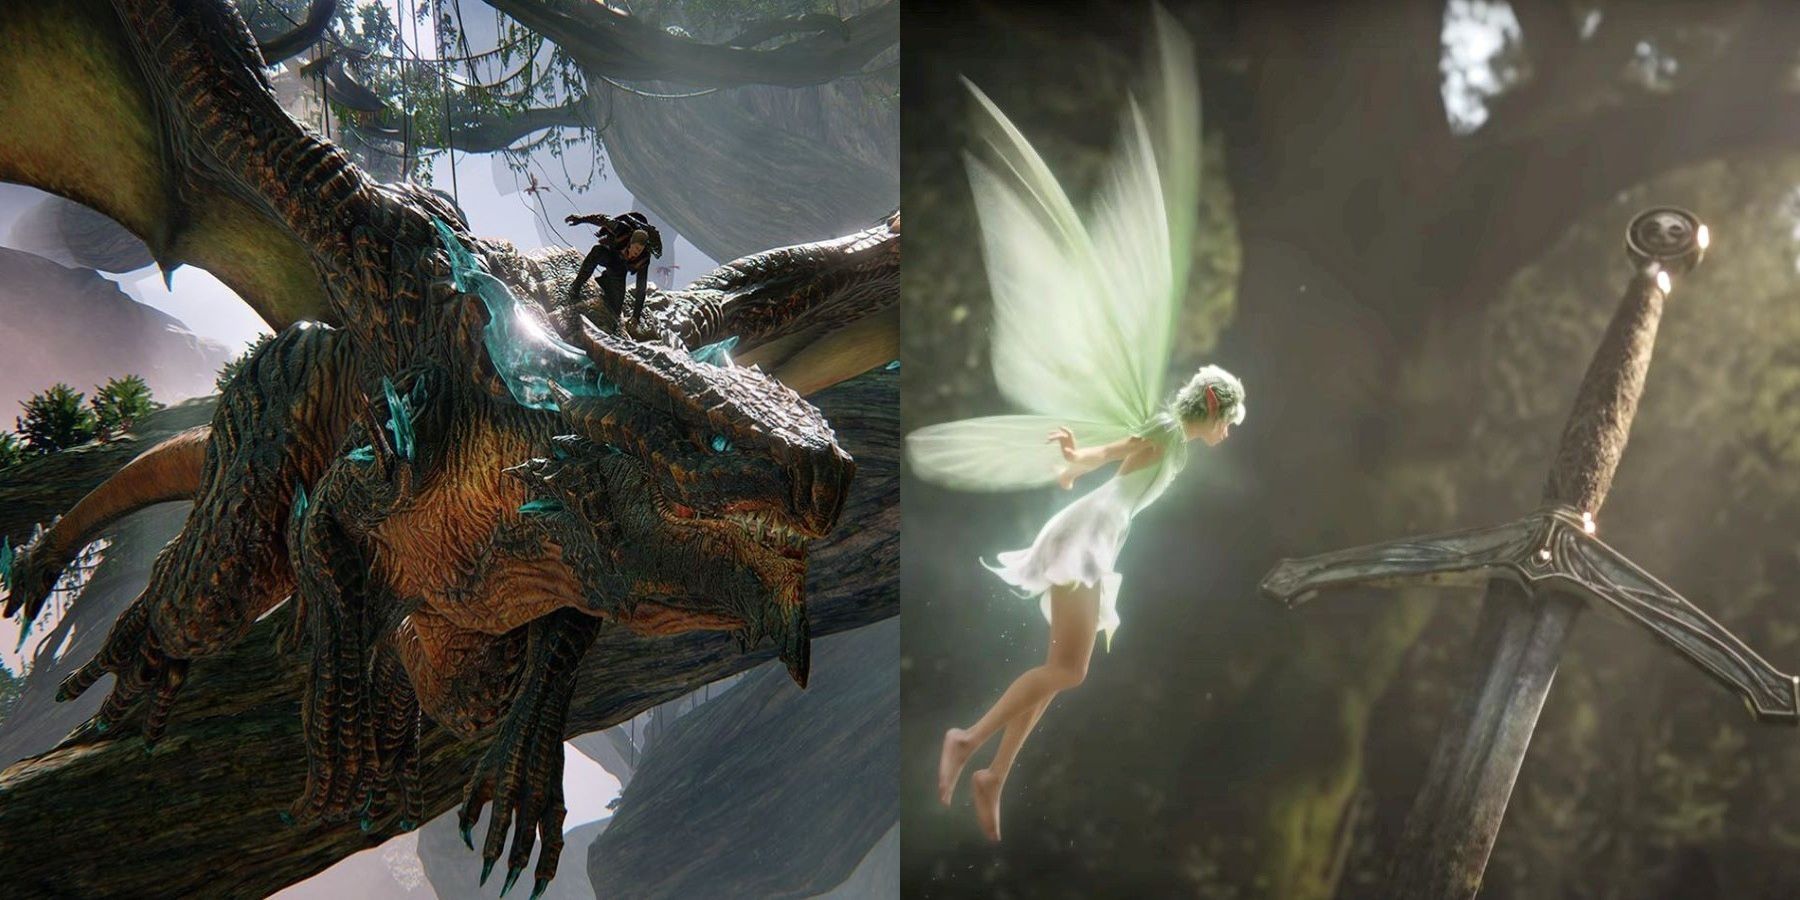 Drew and Thuban from Scalebound next to the fairy from the Fable announcement trailer